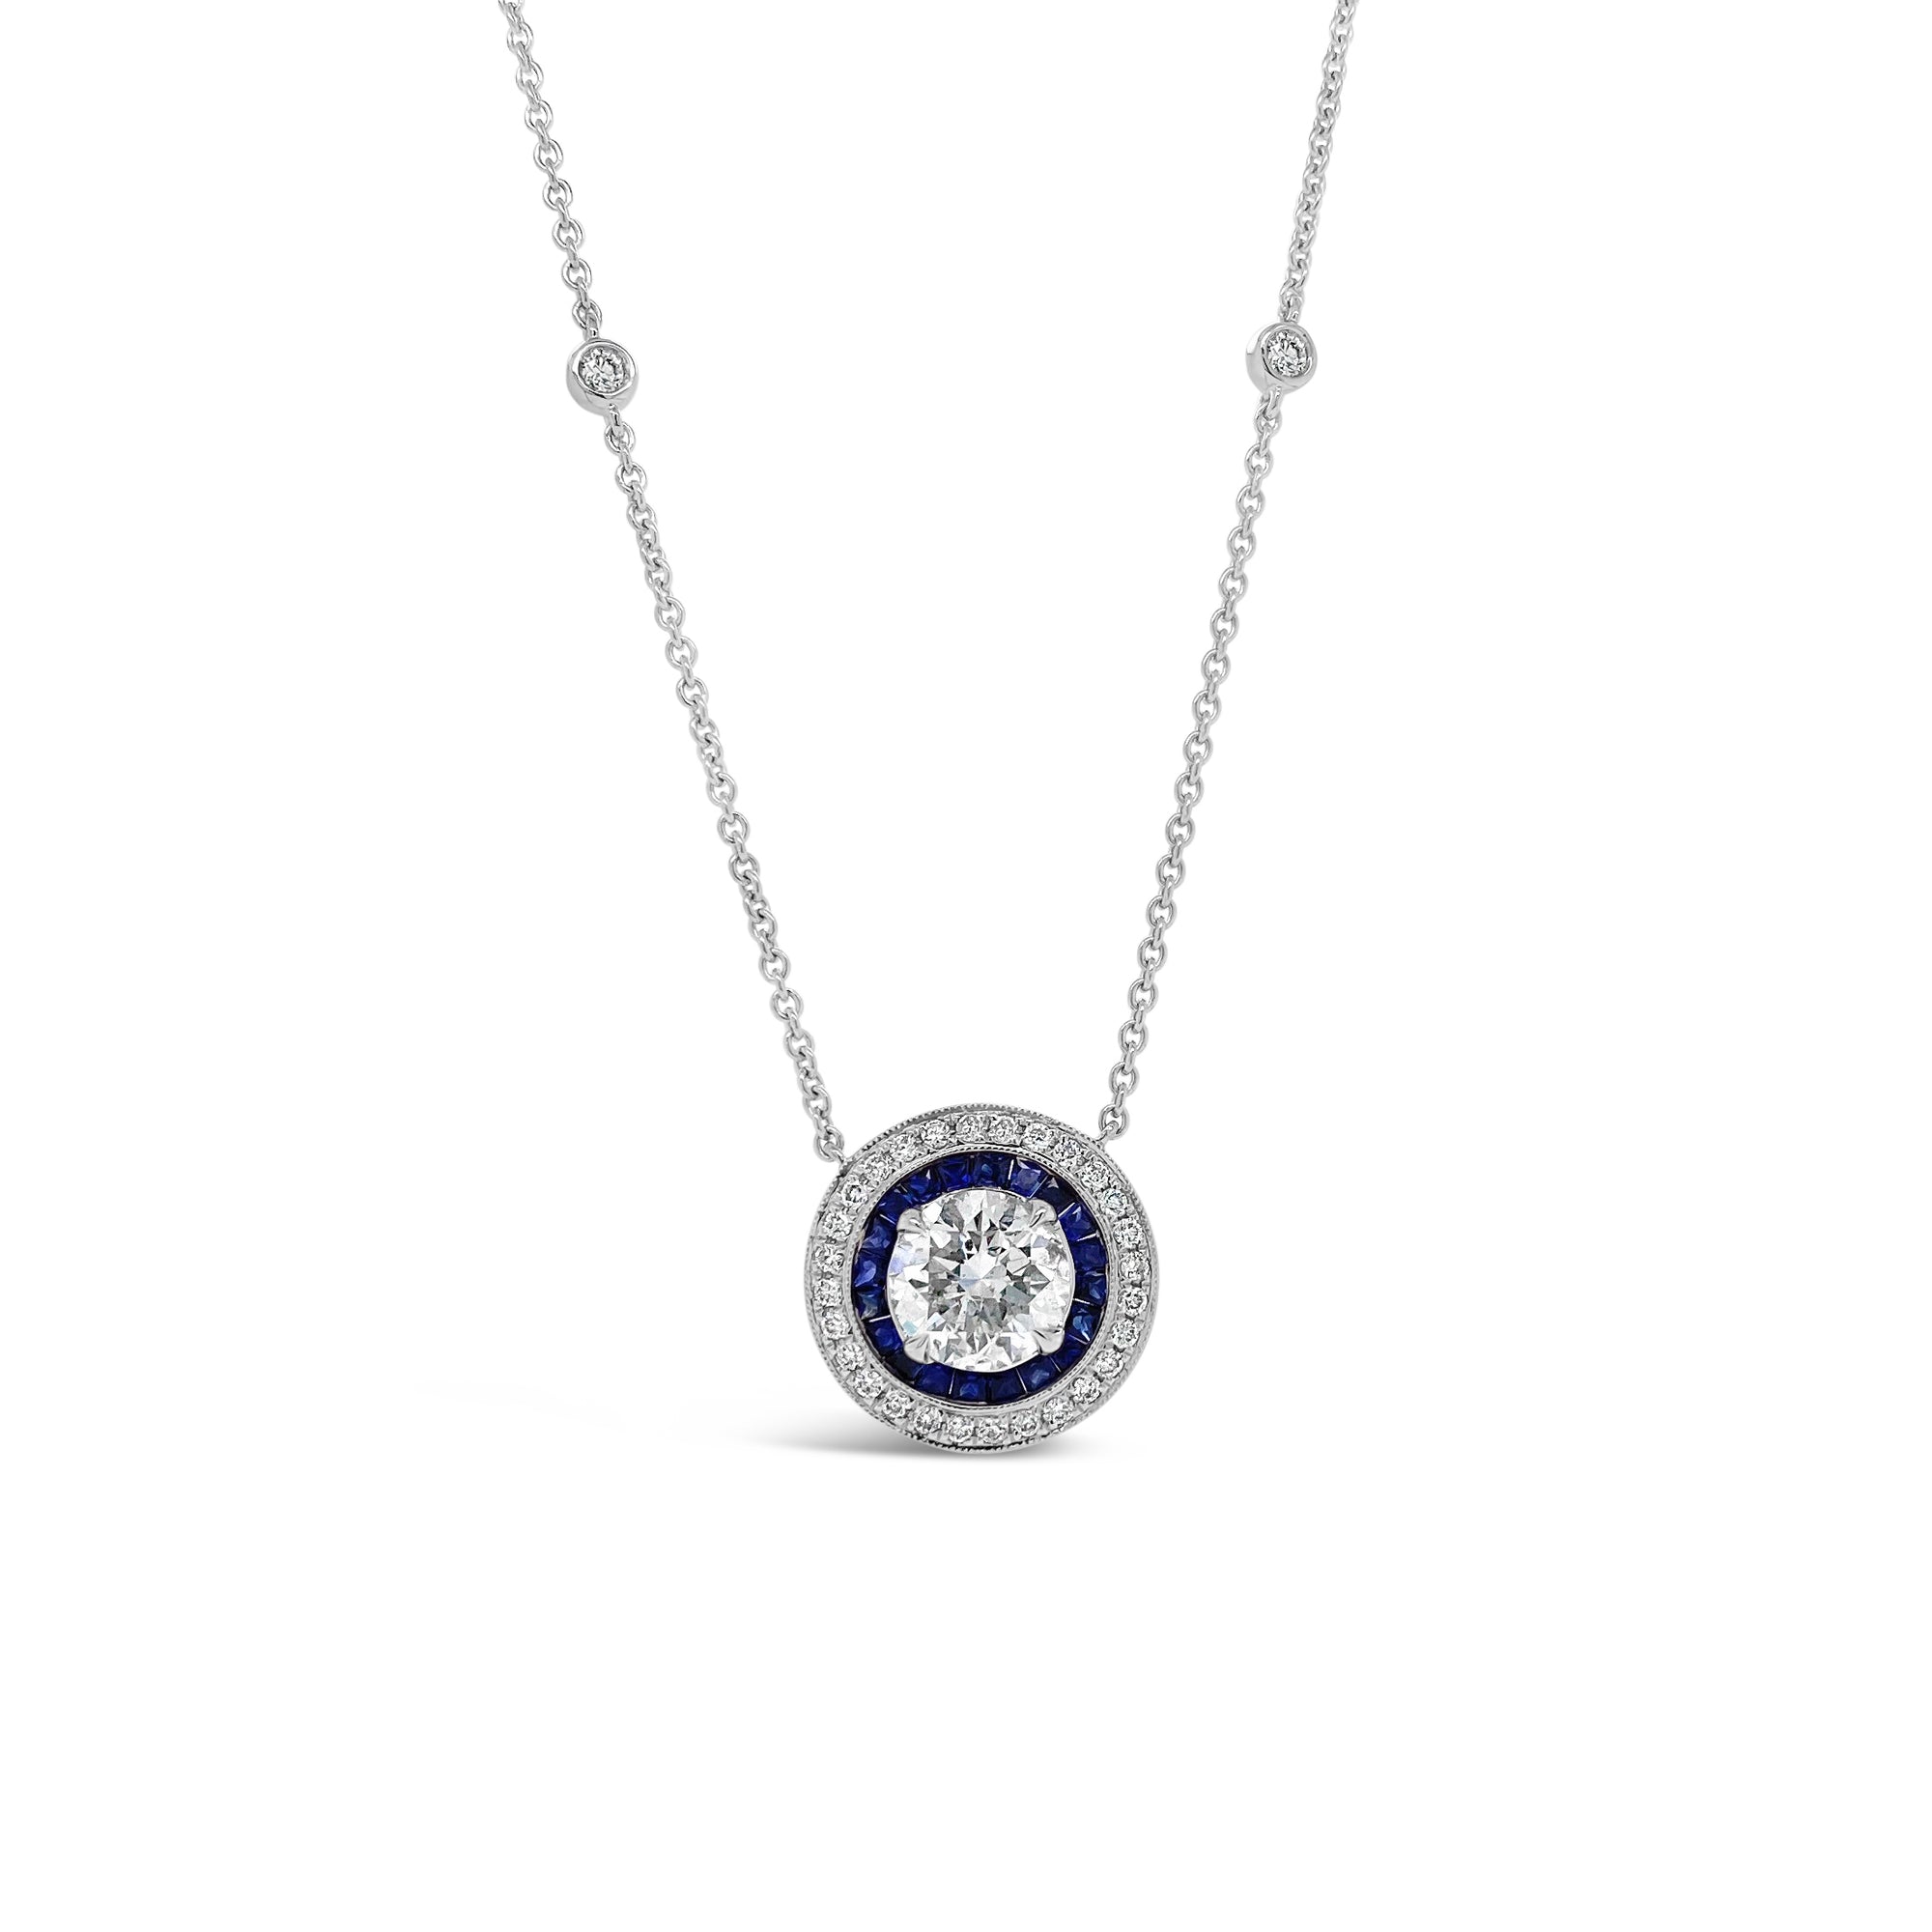 Diamond Solitaire Necklace with Sapphires and Bezel-Set Diamond Stations  - 18K gold weighing 5.50 grams  - 1.39 ct round brilliant-cut diamond (GIA-graded G-H color, I2 clarity)  - 20 sapphires totaling 0.59 carats  - 32 round diamonds totaling 0.30 carats